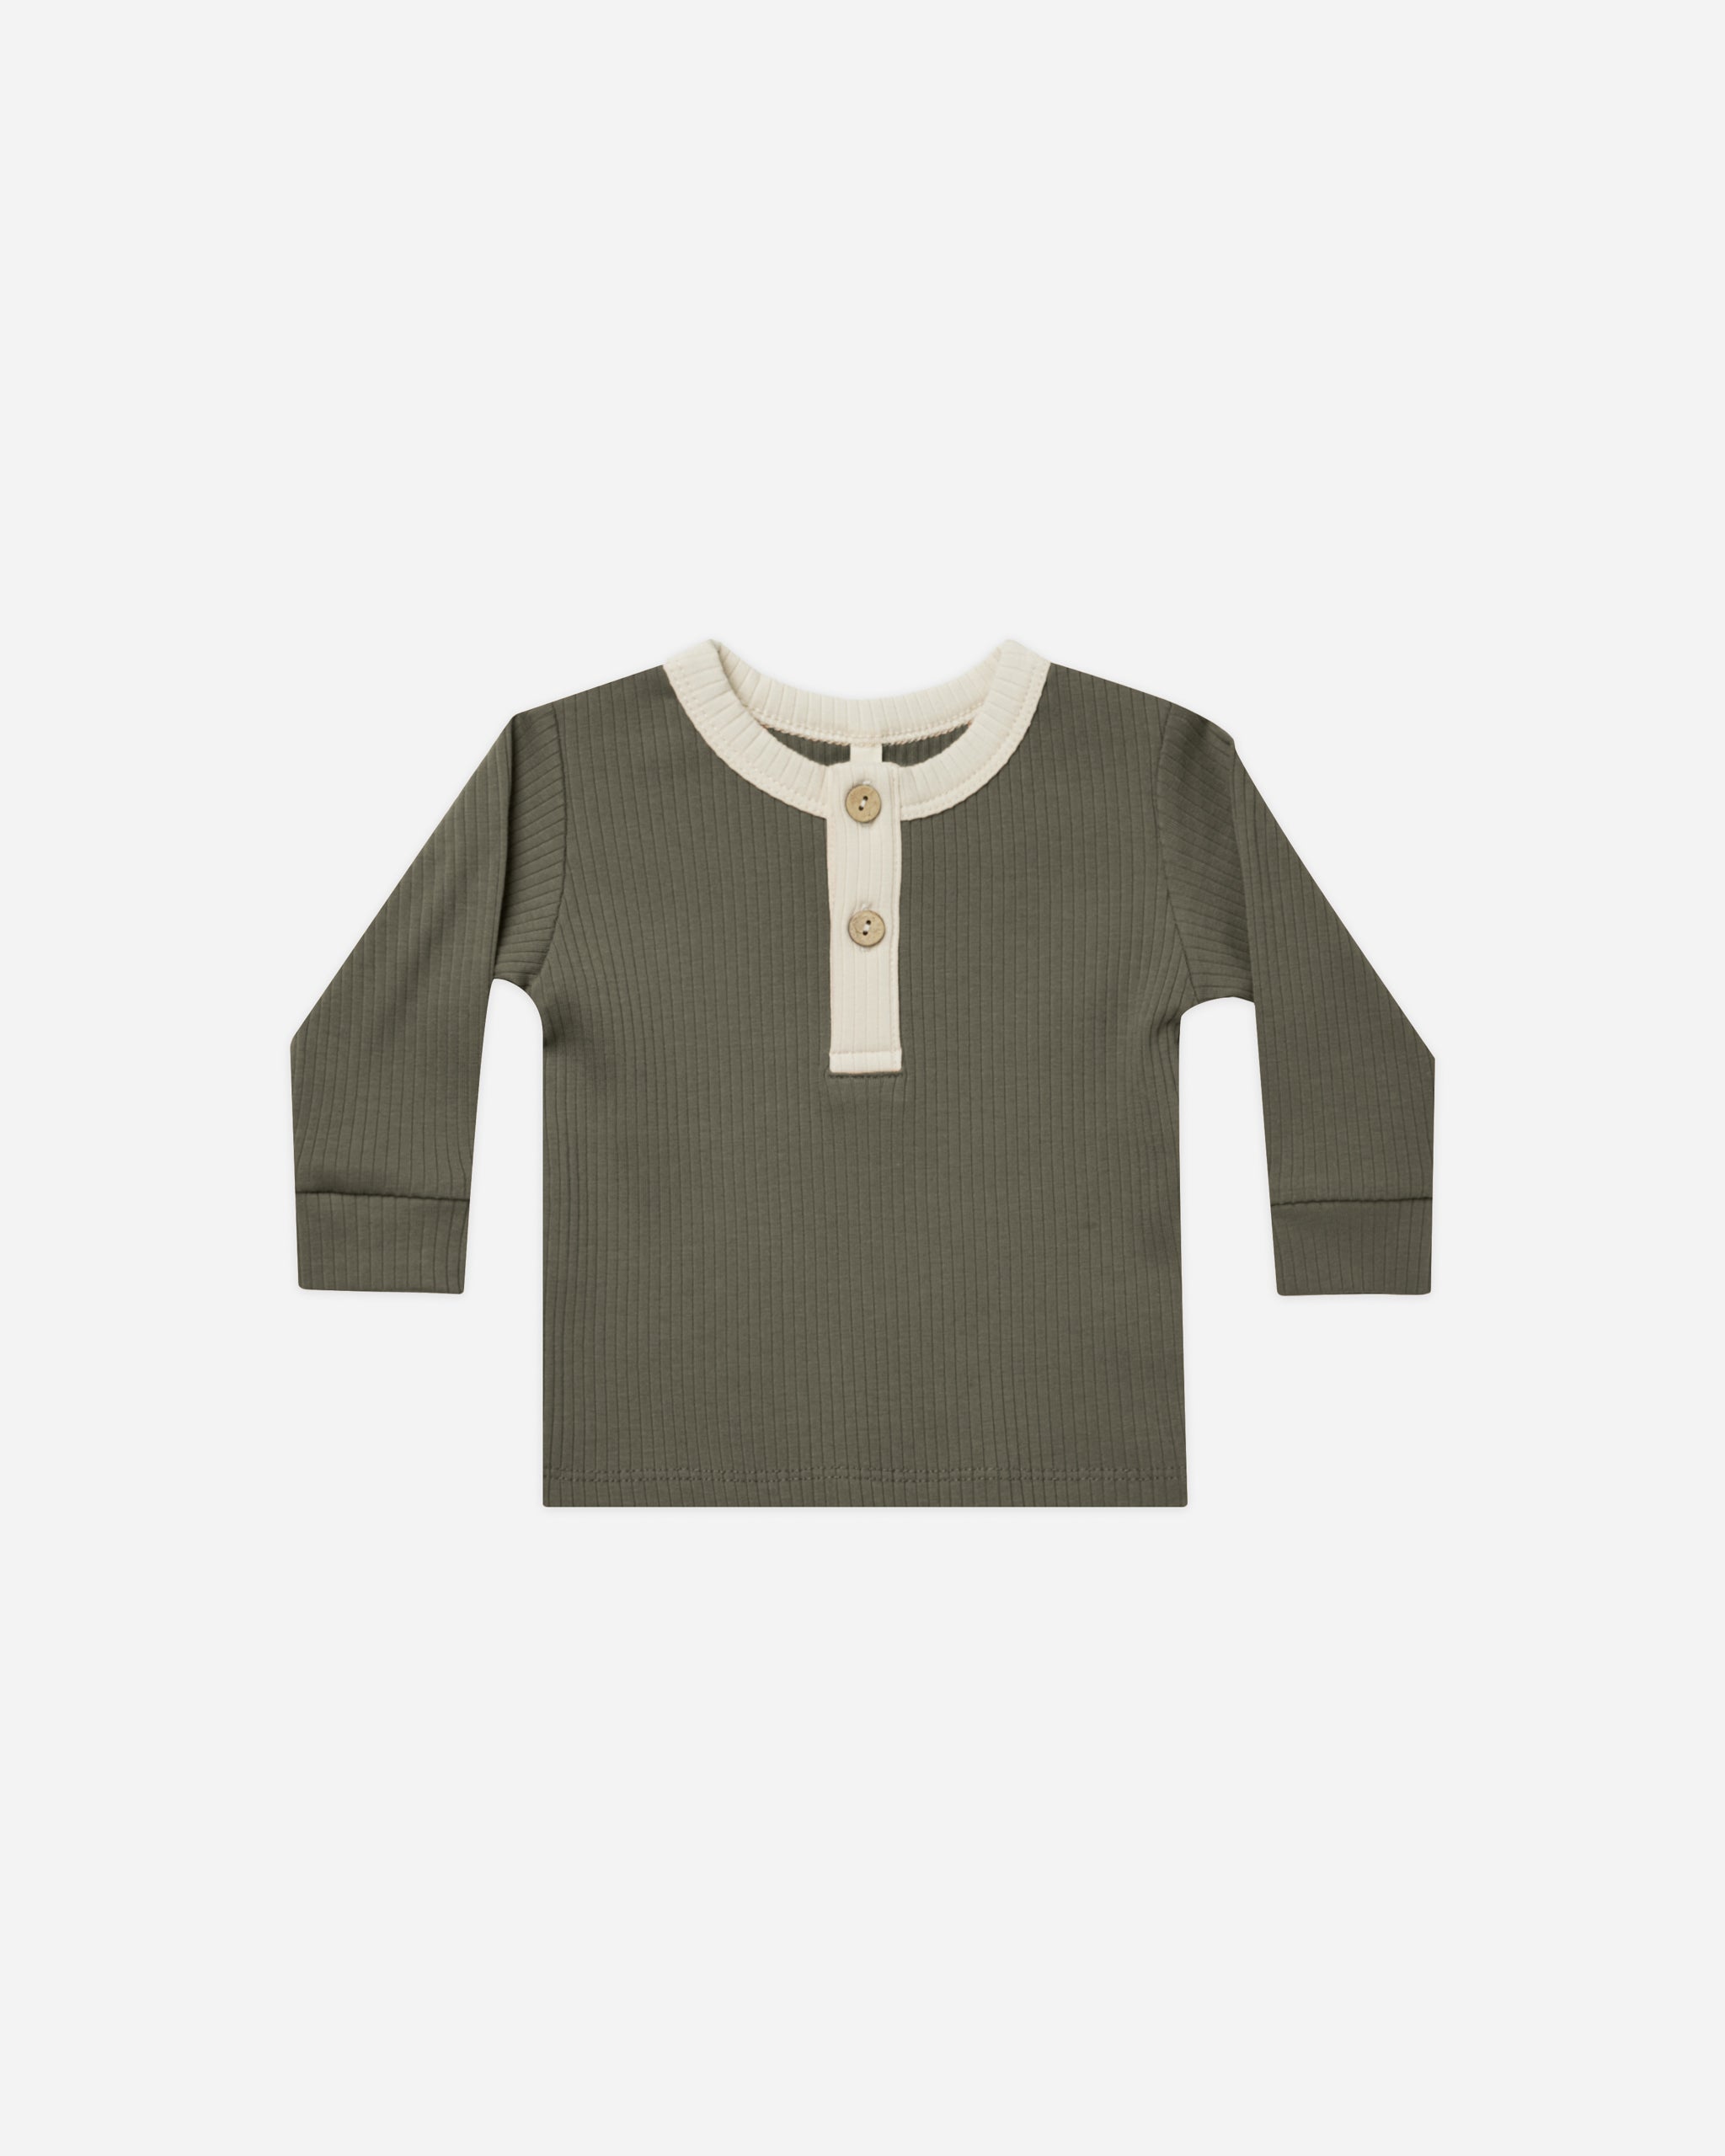 Ribbed Long Sleeve Henley || Forest - Rylee + Cru | Kids Clothes | Trendy Baby Clothes | Modern Infant Outfits |